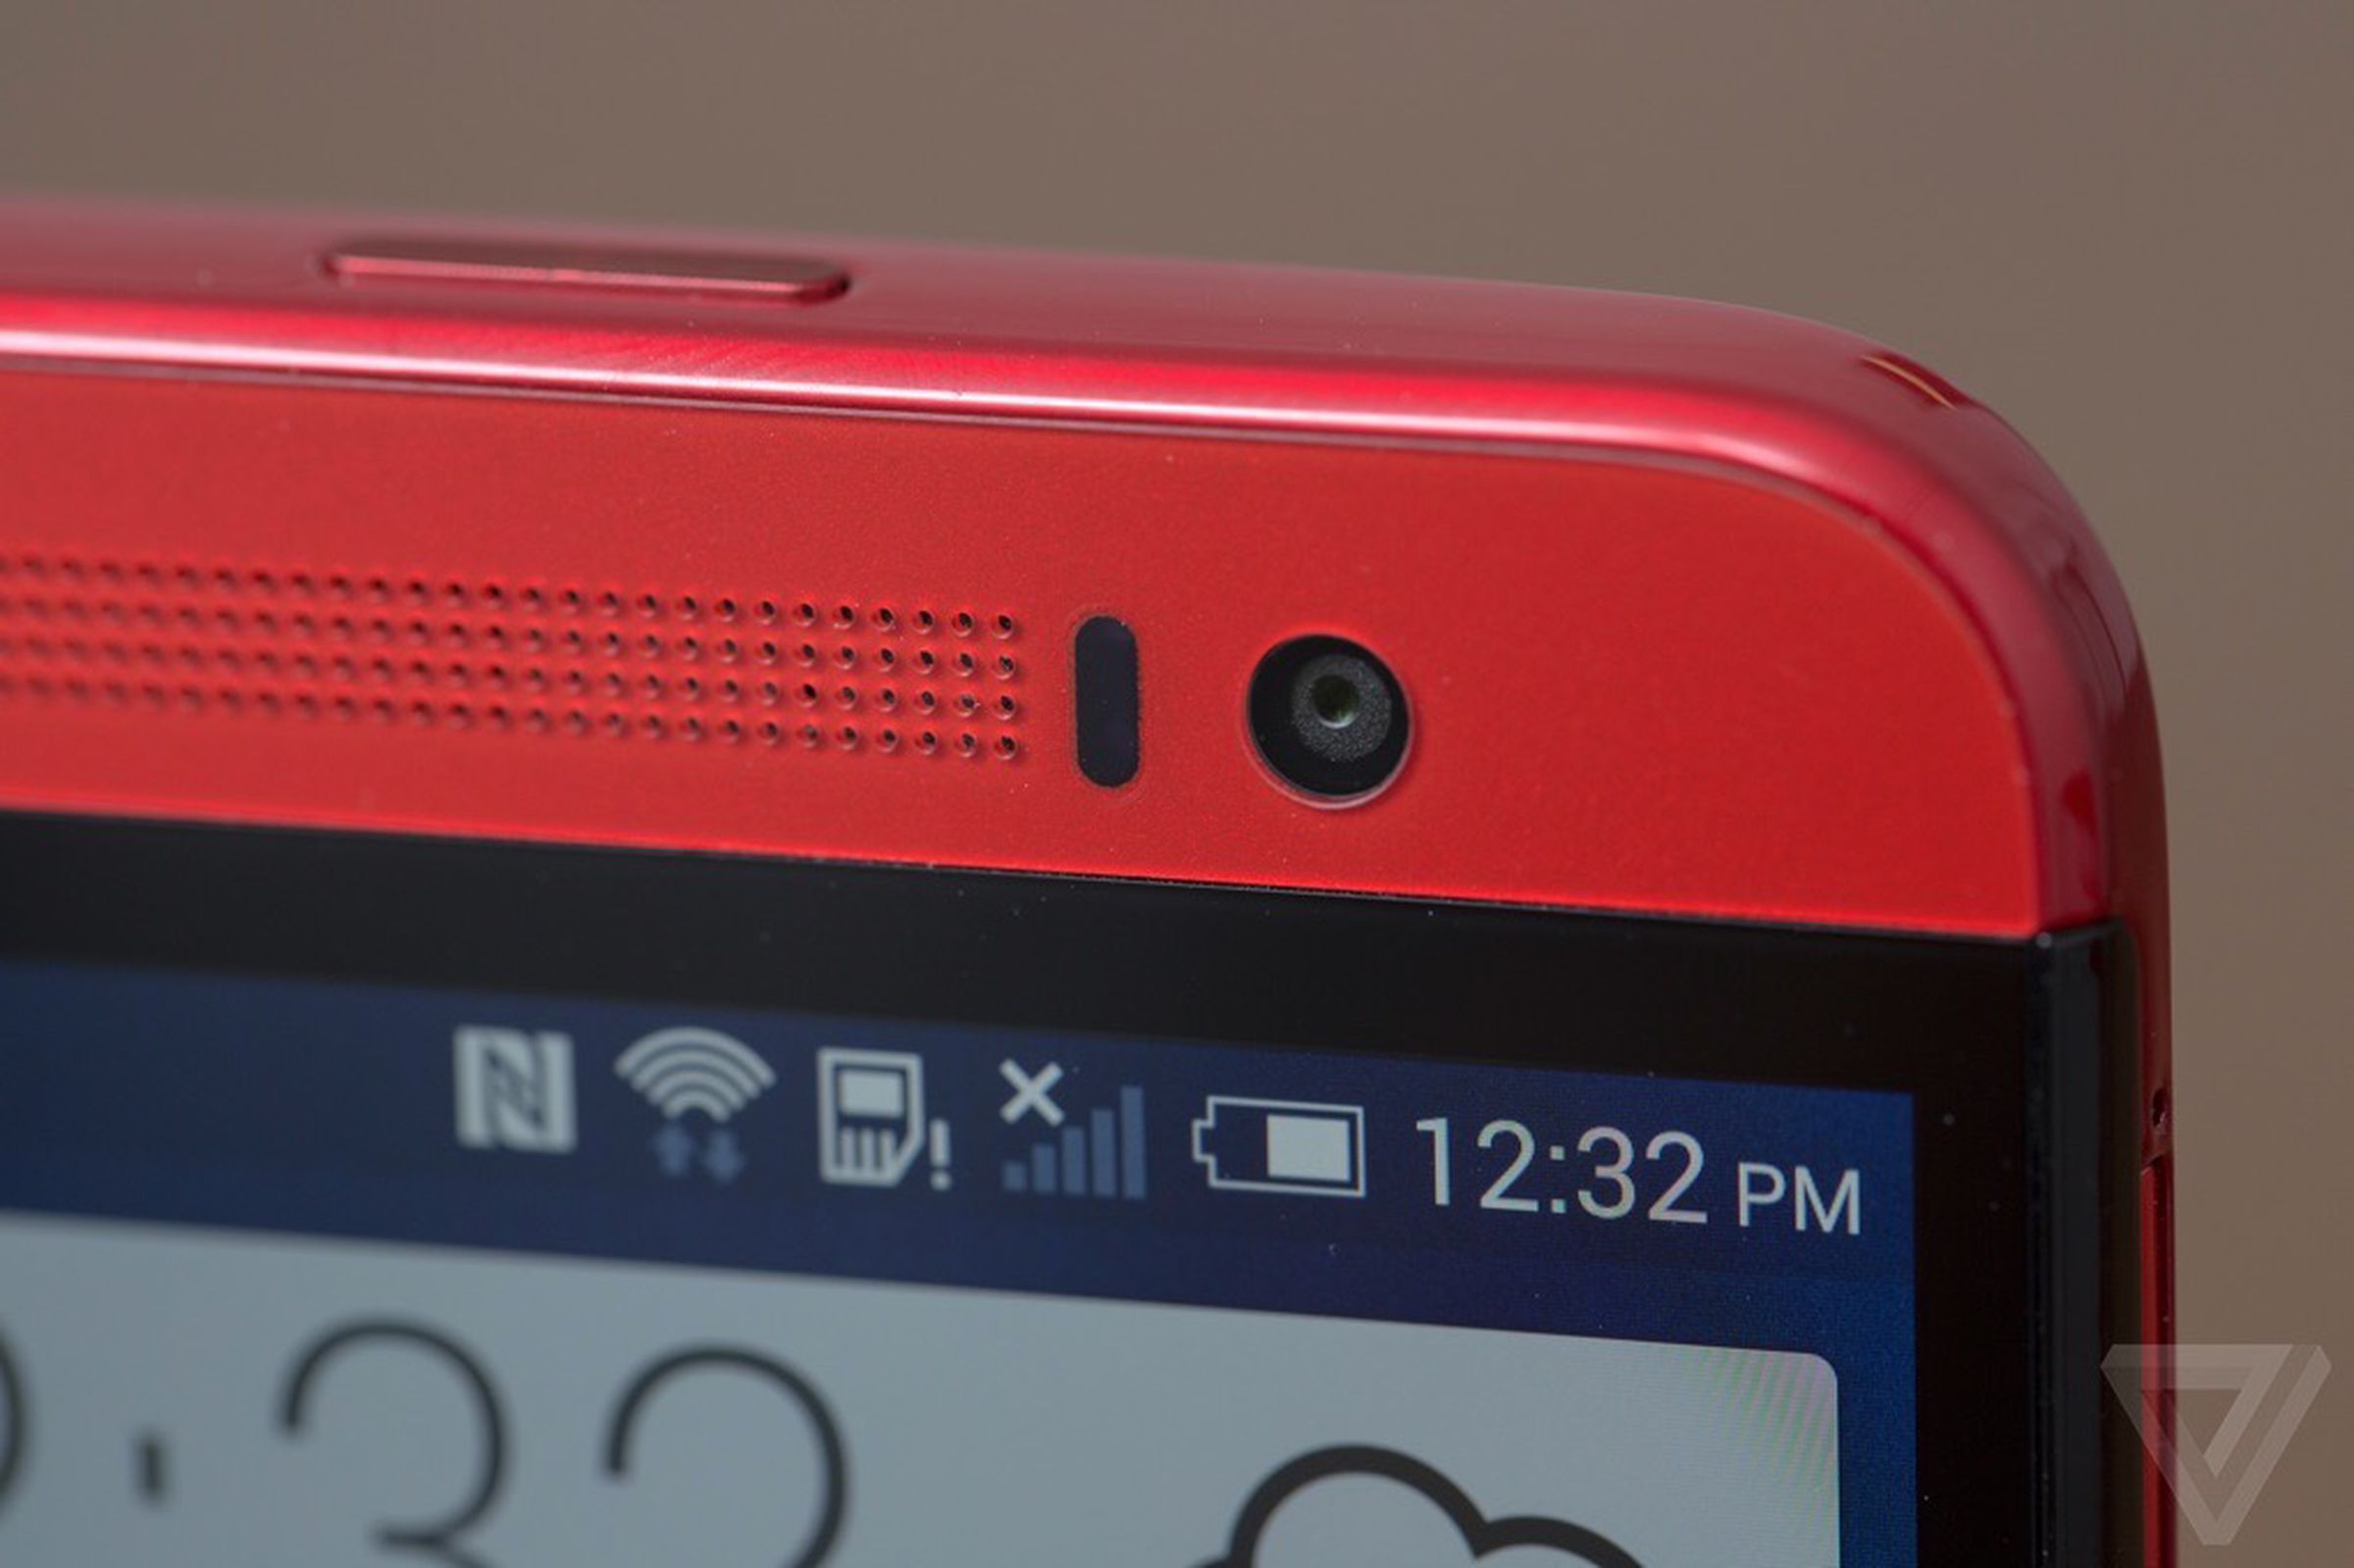 HTC One E8 hands-on photos